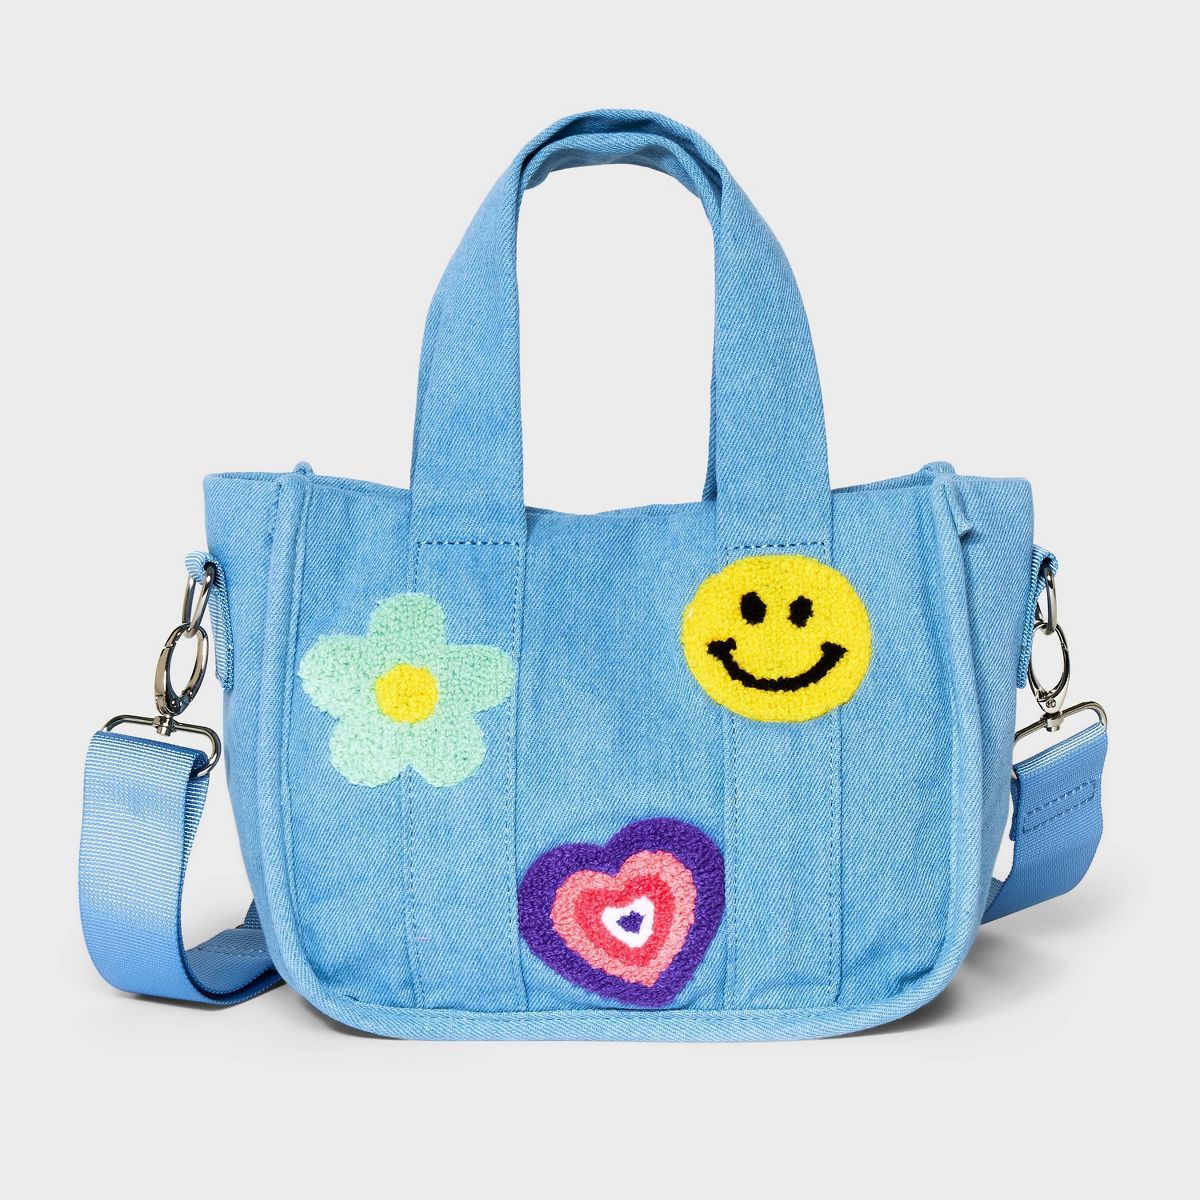 Girls' Mini Crossbody Bag Tote with Denim Patches - art class™ Blue | Target